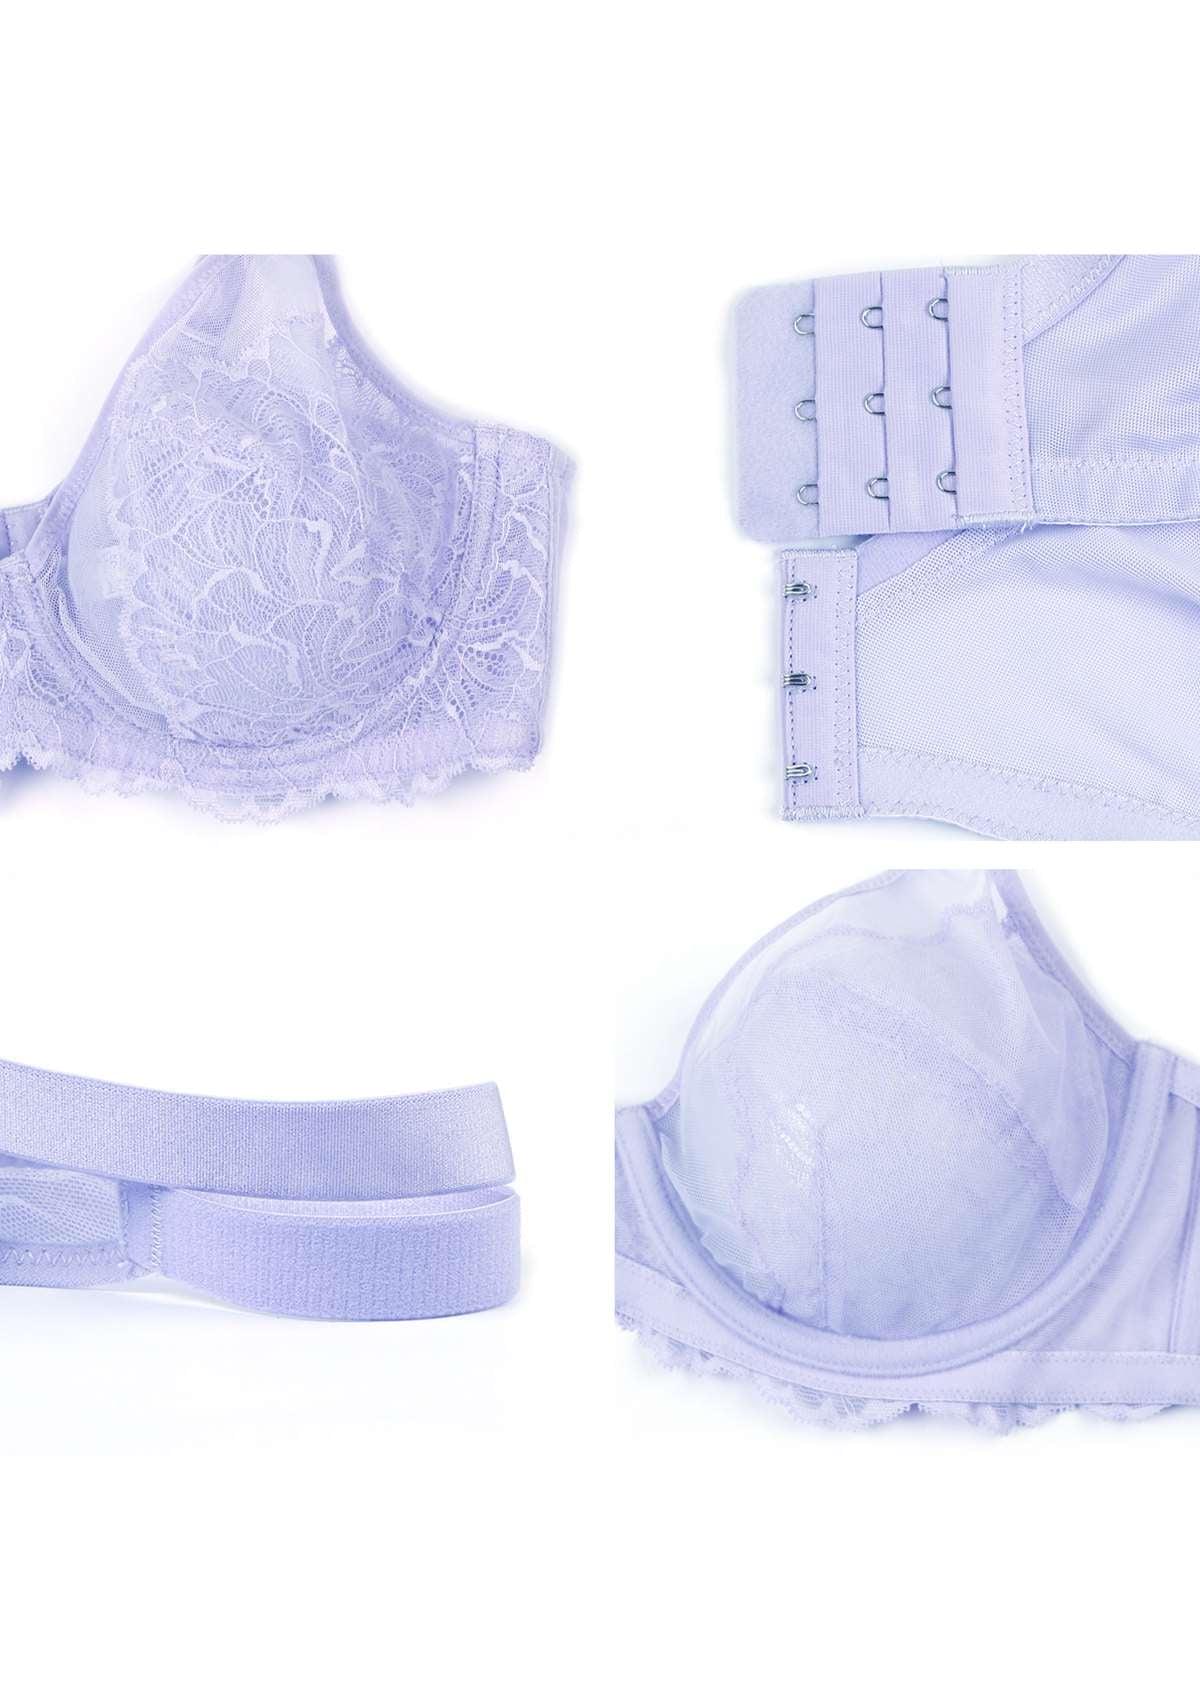 HSIA Blossom Transparent Lace Bra: Plus Size Wired Back Smoothing Bra - Light Purple / 40 / DD/E